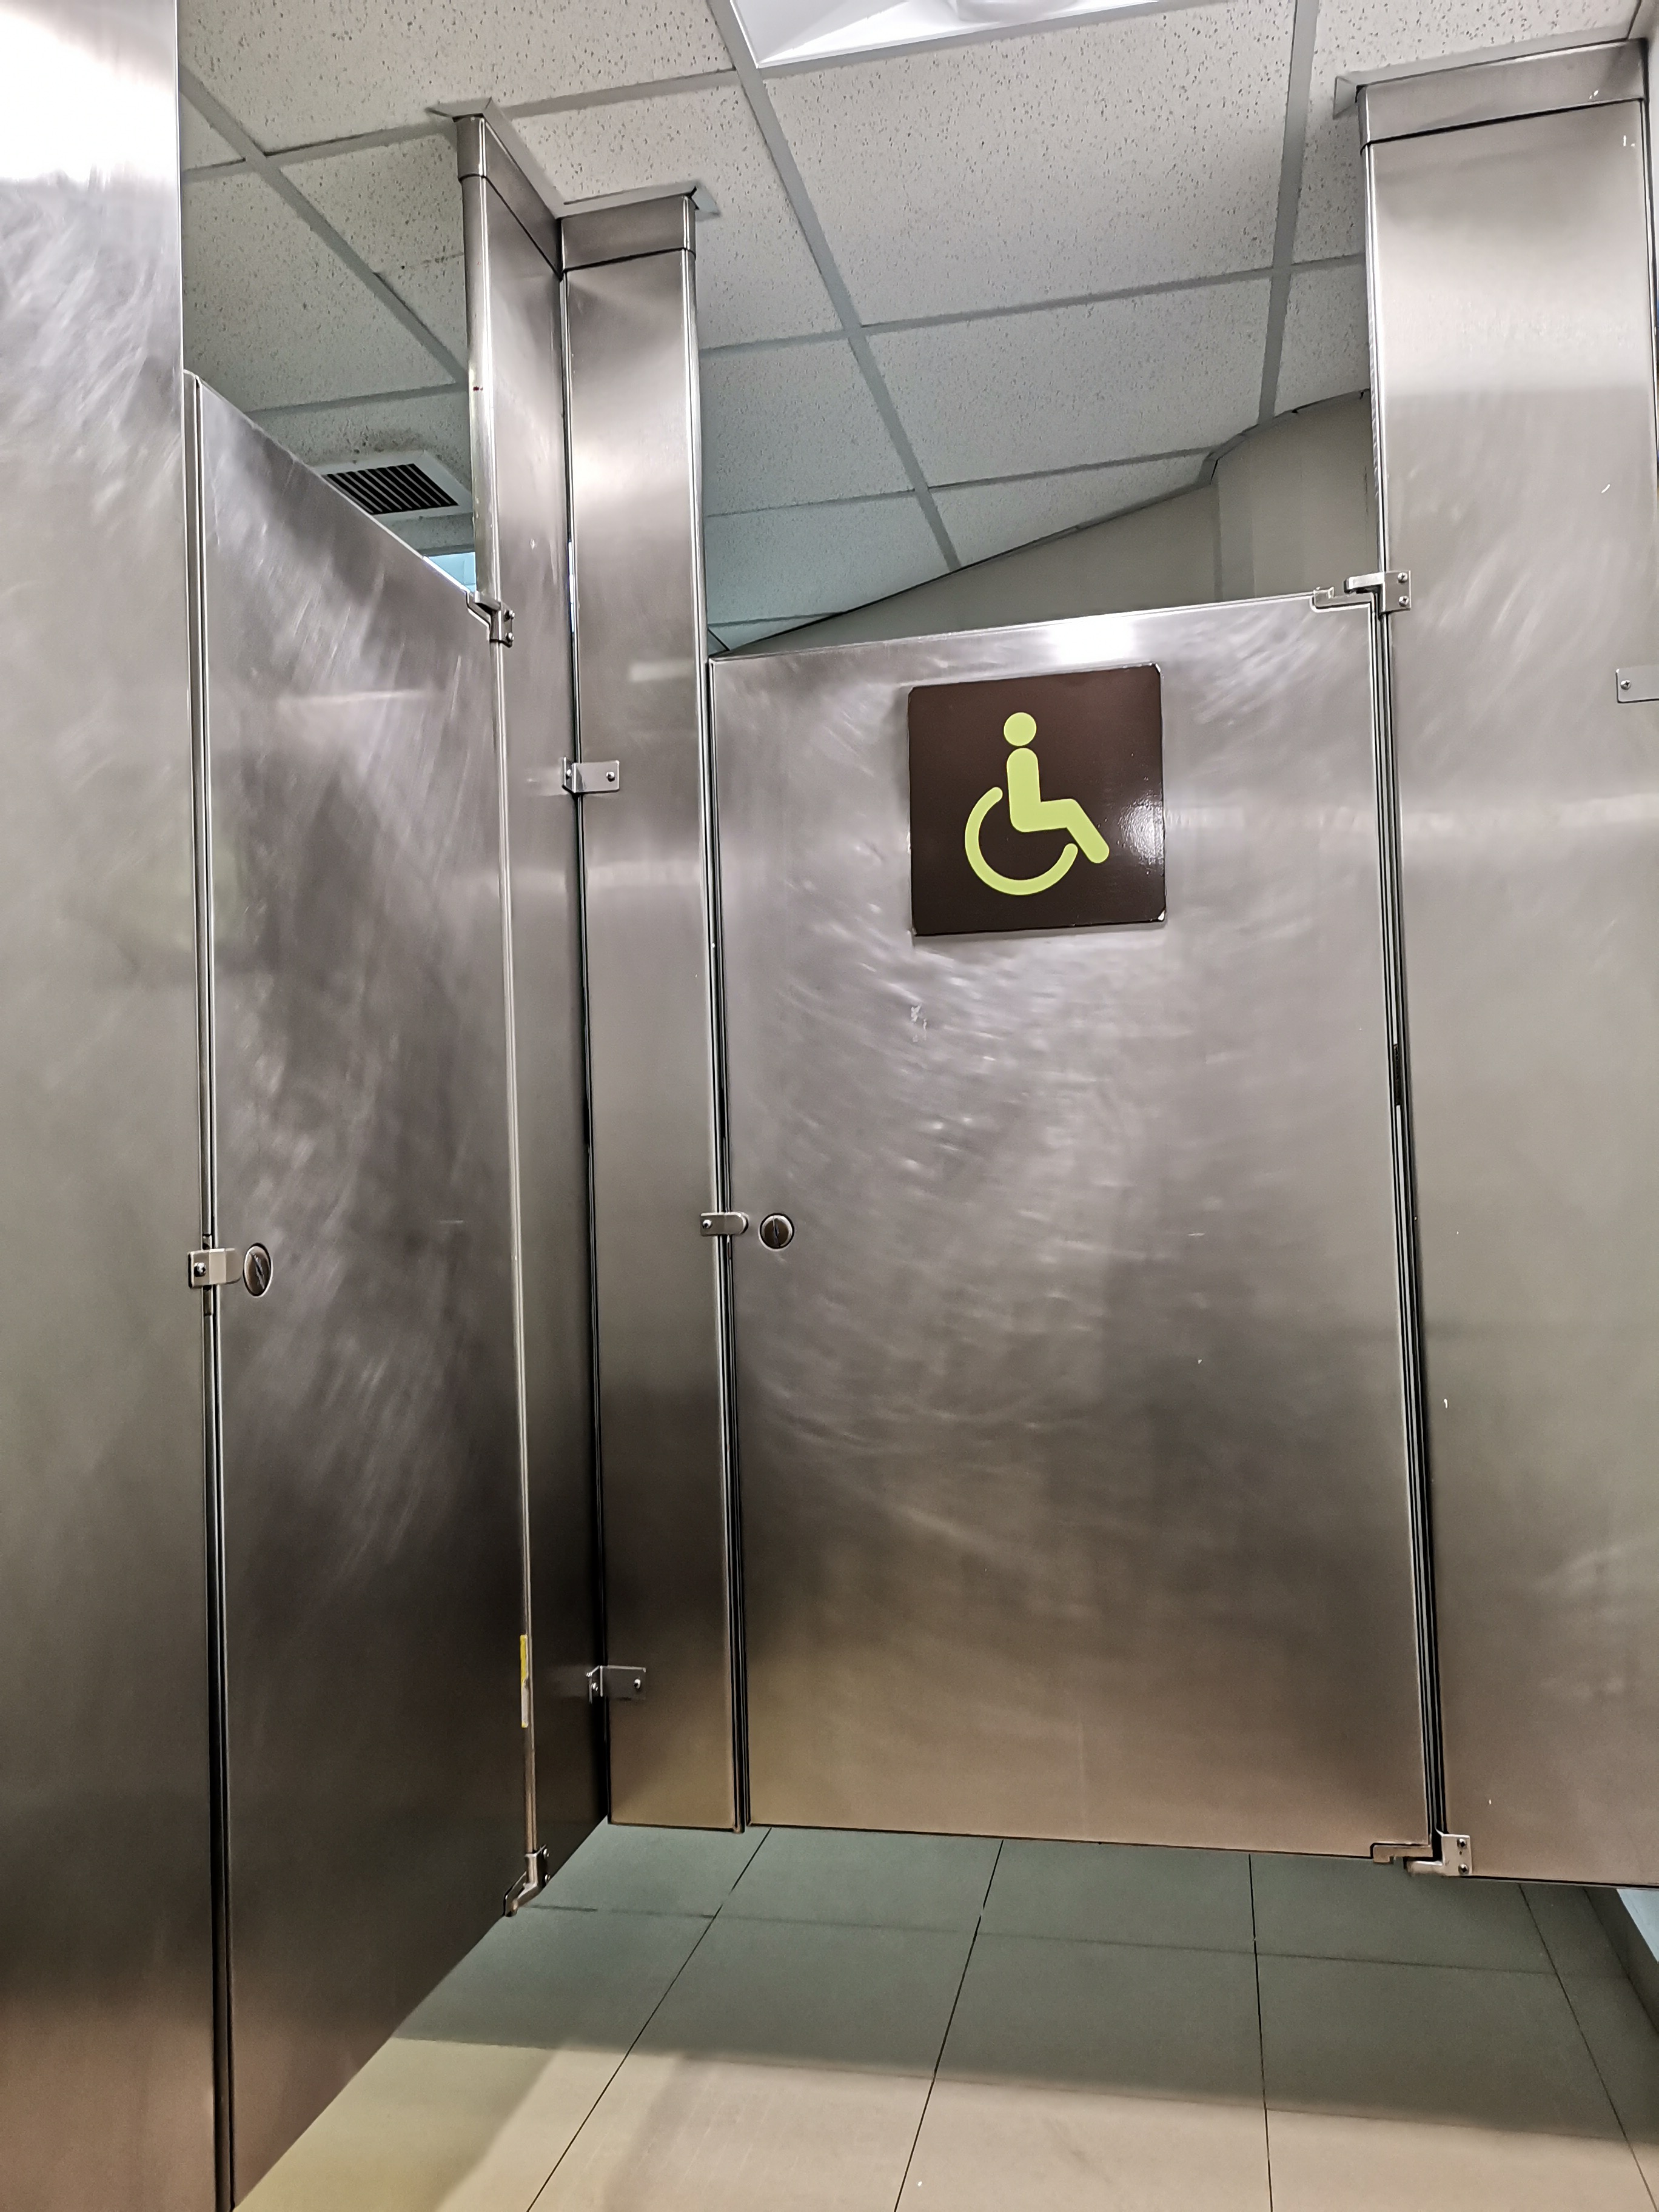 Dear Newark Airport, This is an Accessible Toilet